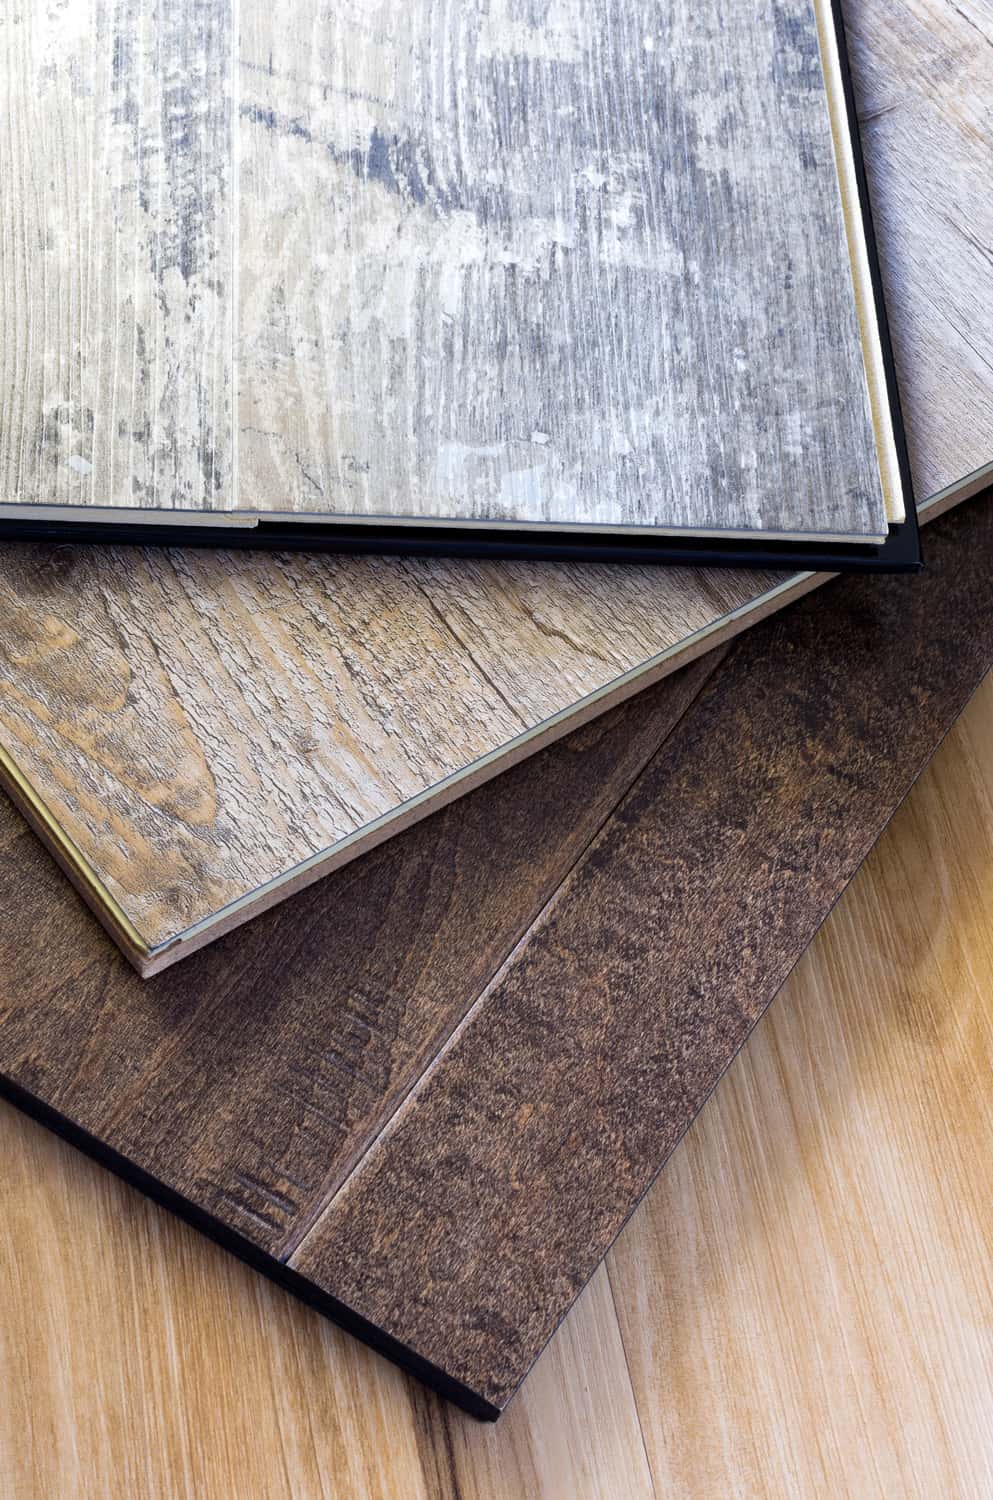 engineered tongue in groove hardwood floor planks of various styles and finishes in a stack